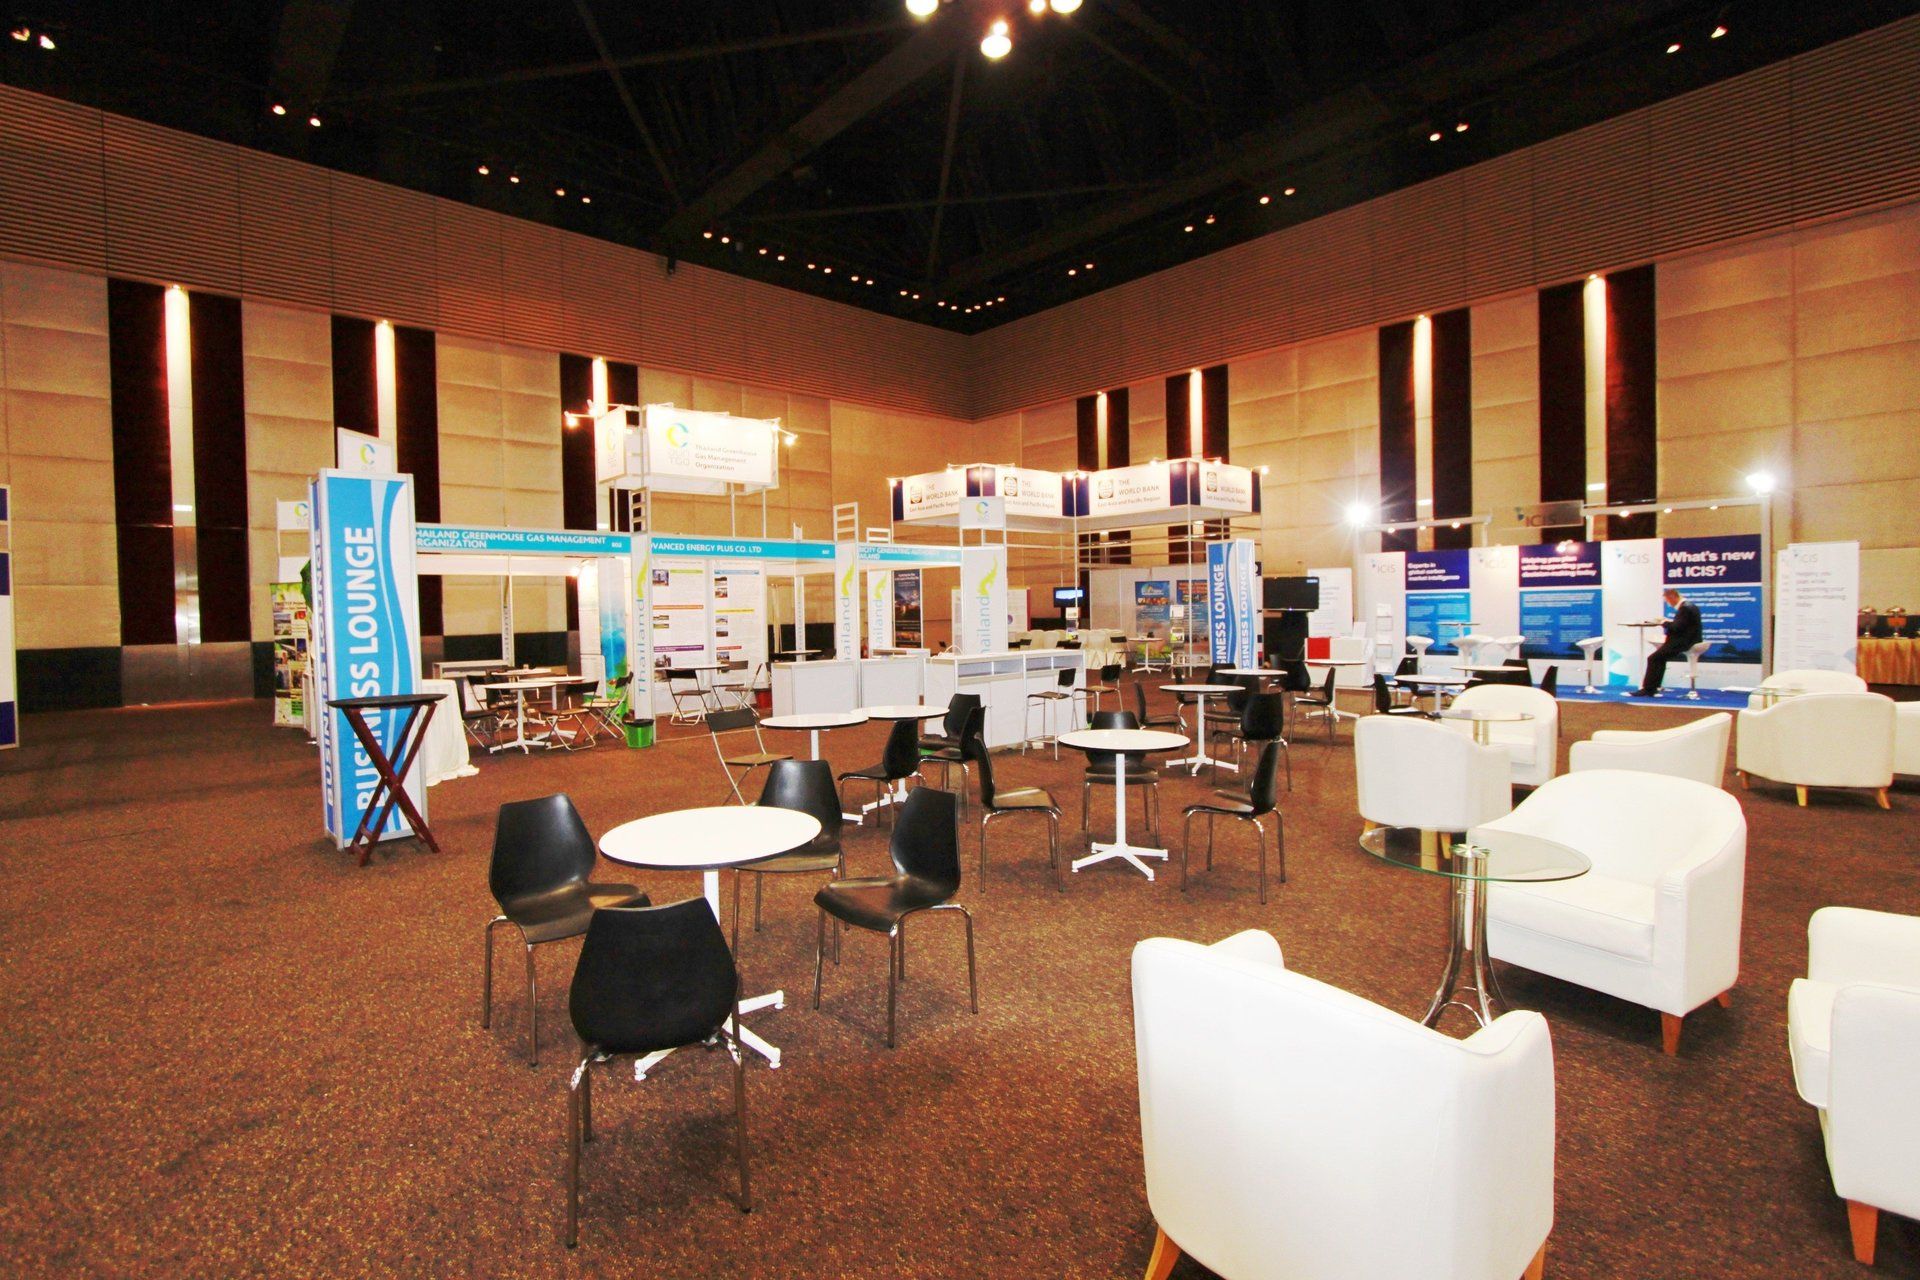 Carbon Forum Asia @ Thailand. Booth designed and built by Essential Global Fairs.